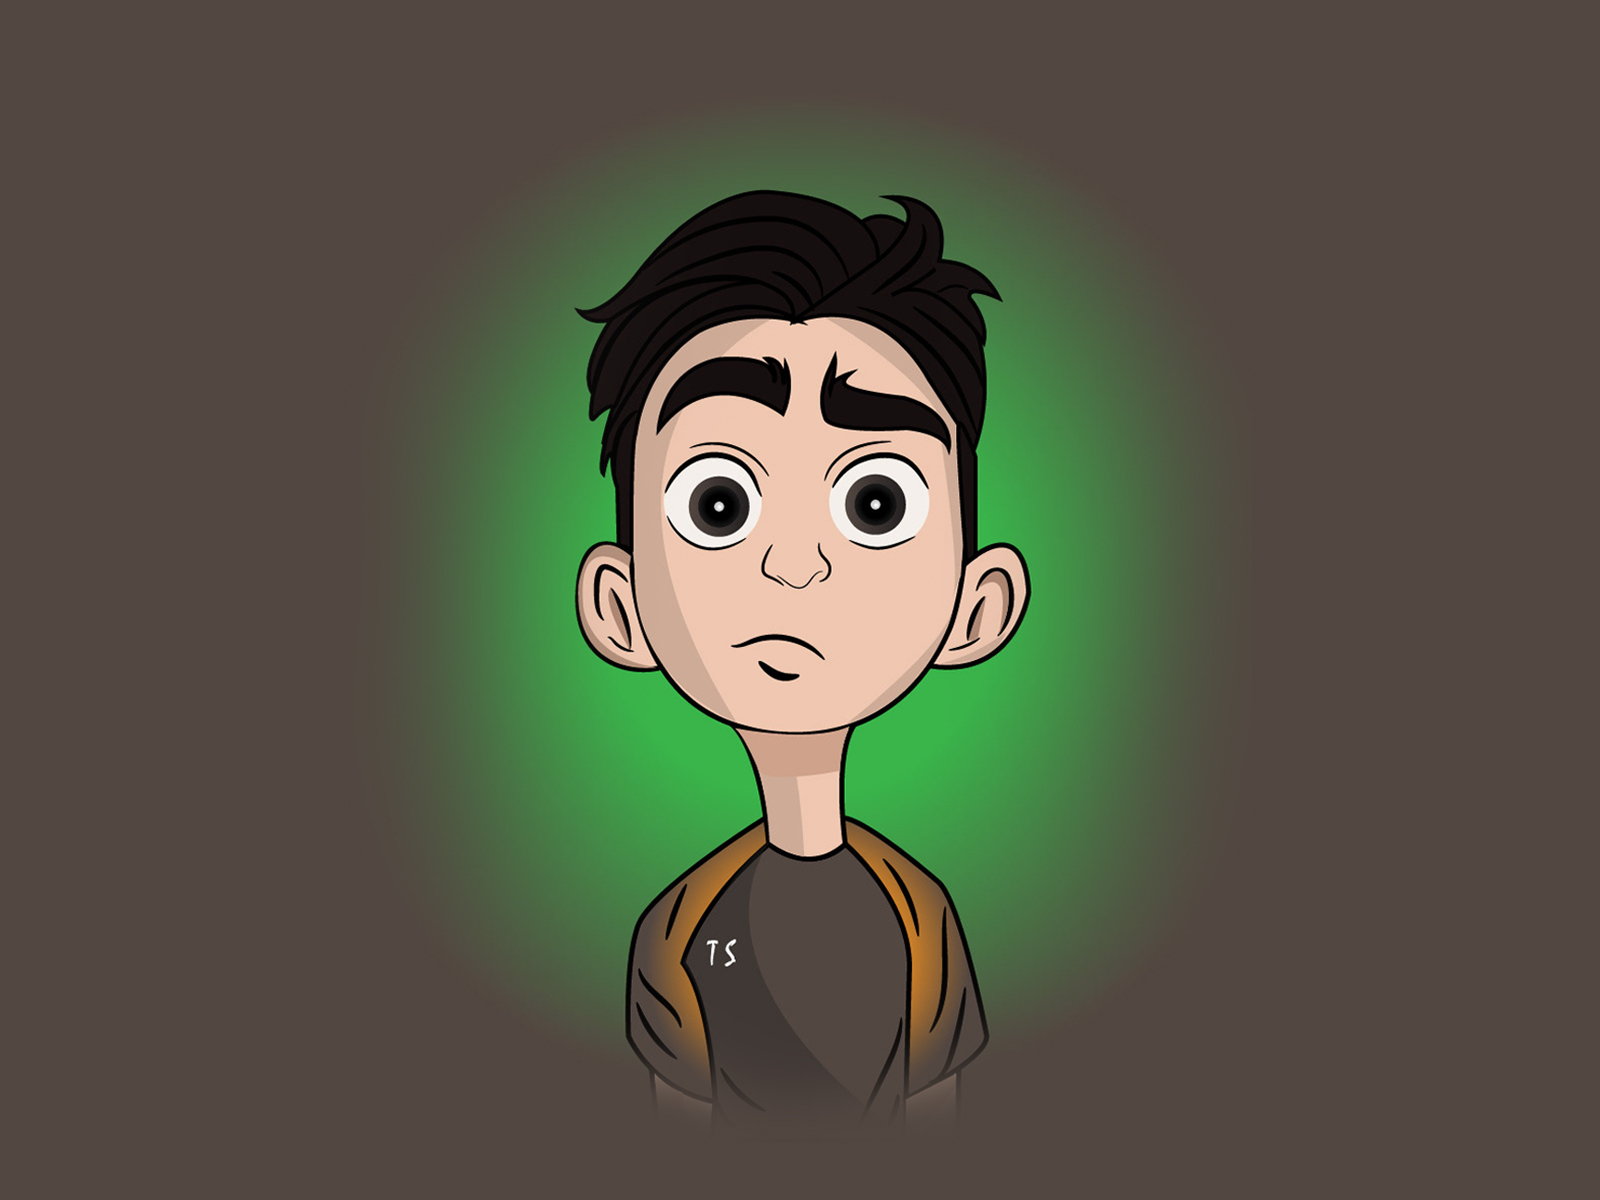 Male Cartoon Character by Tanmoy Sharma on Dribbble